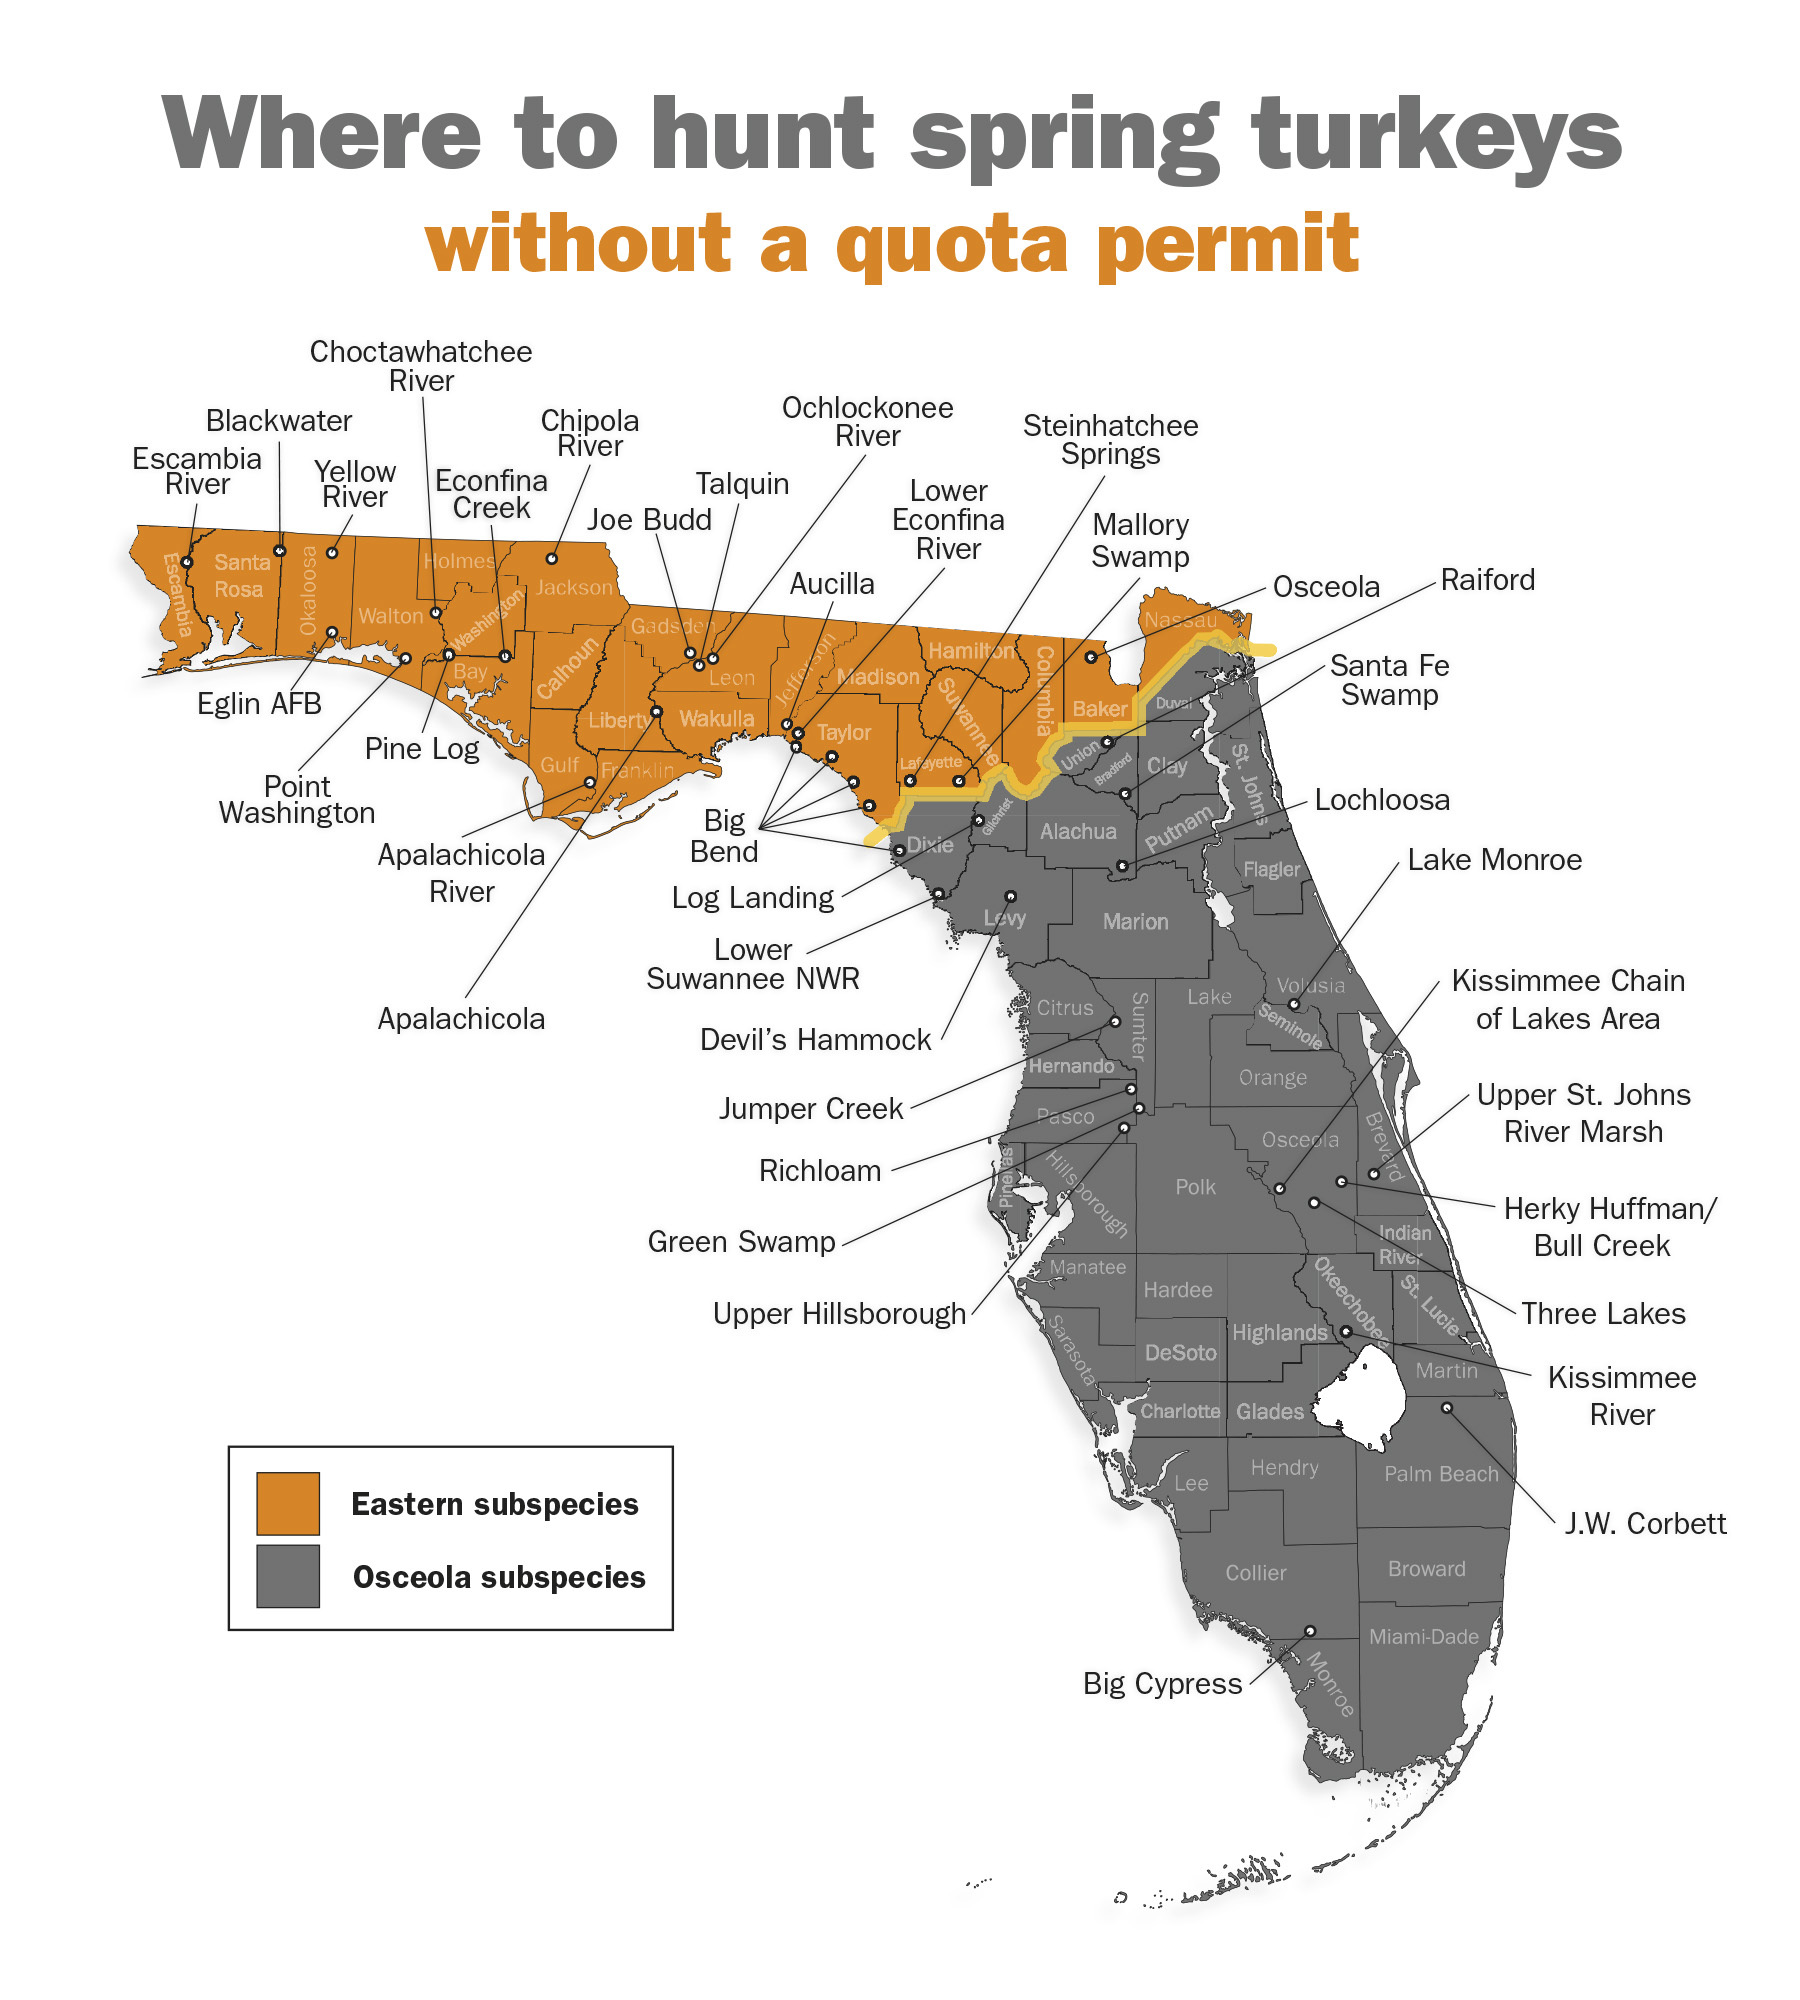 Where to hunt spring turkeys without a quota permit